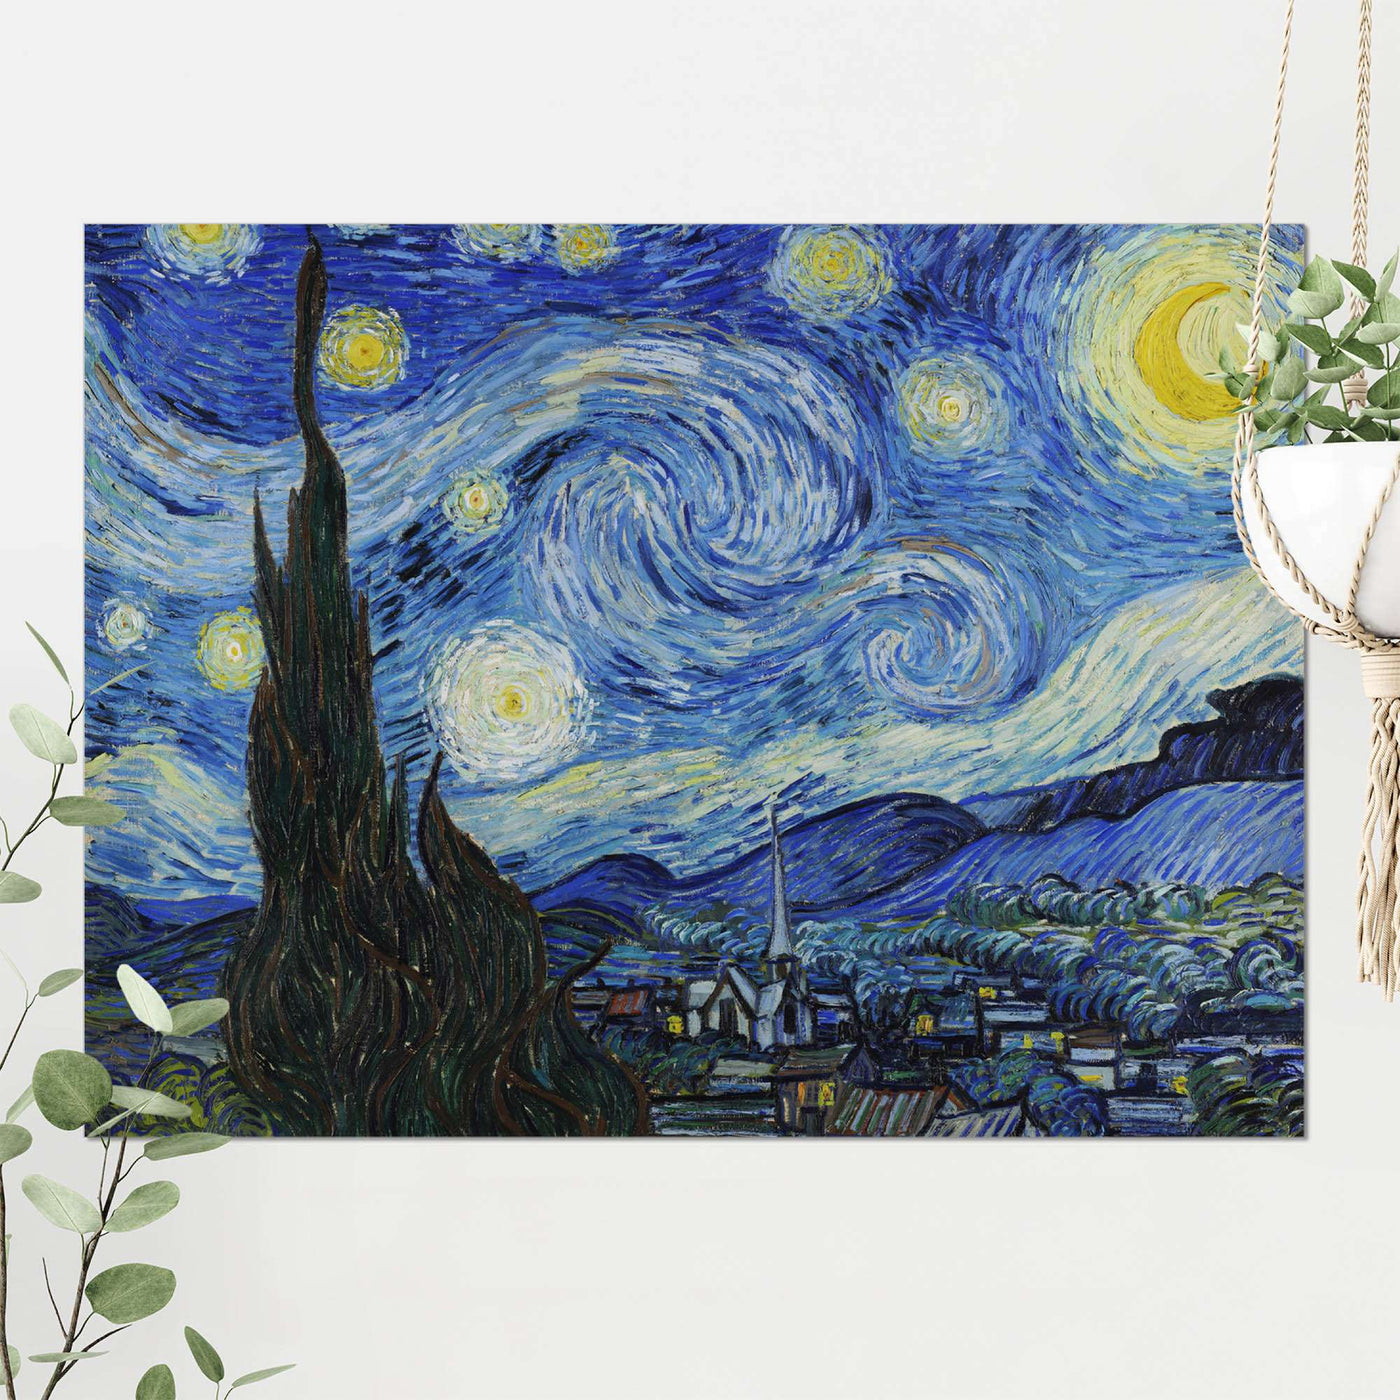 "Starry Night" by Van Gogh on Aluminium, Acrylic, Canvas, Framed Prints or Print-only